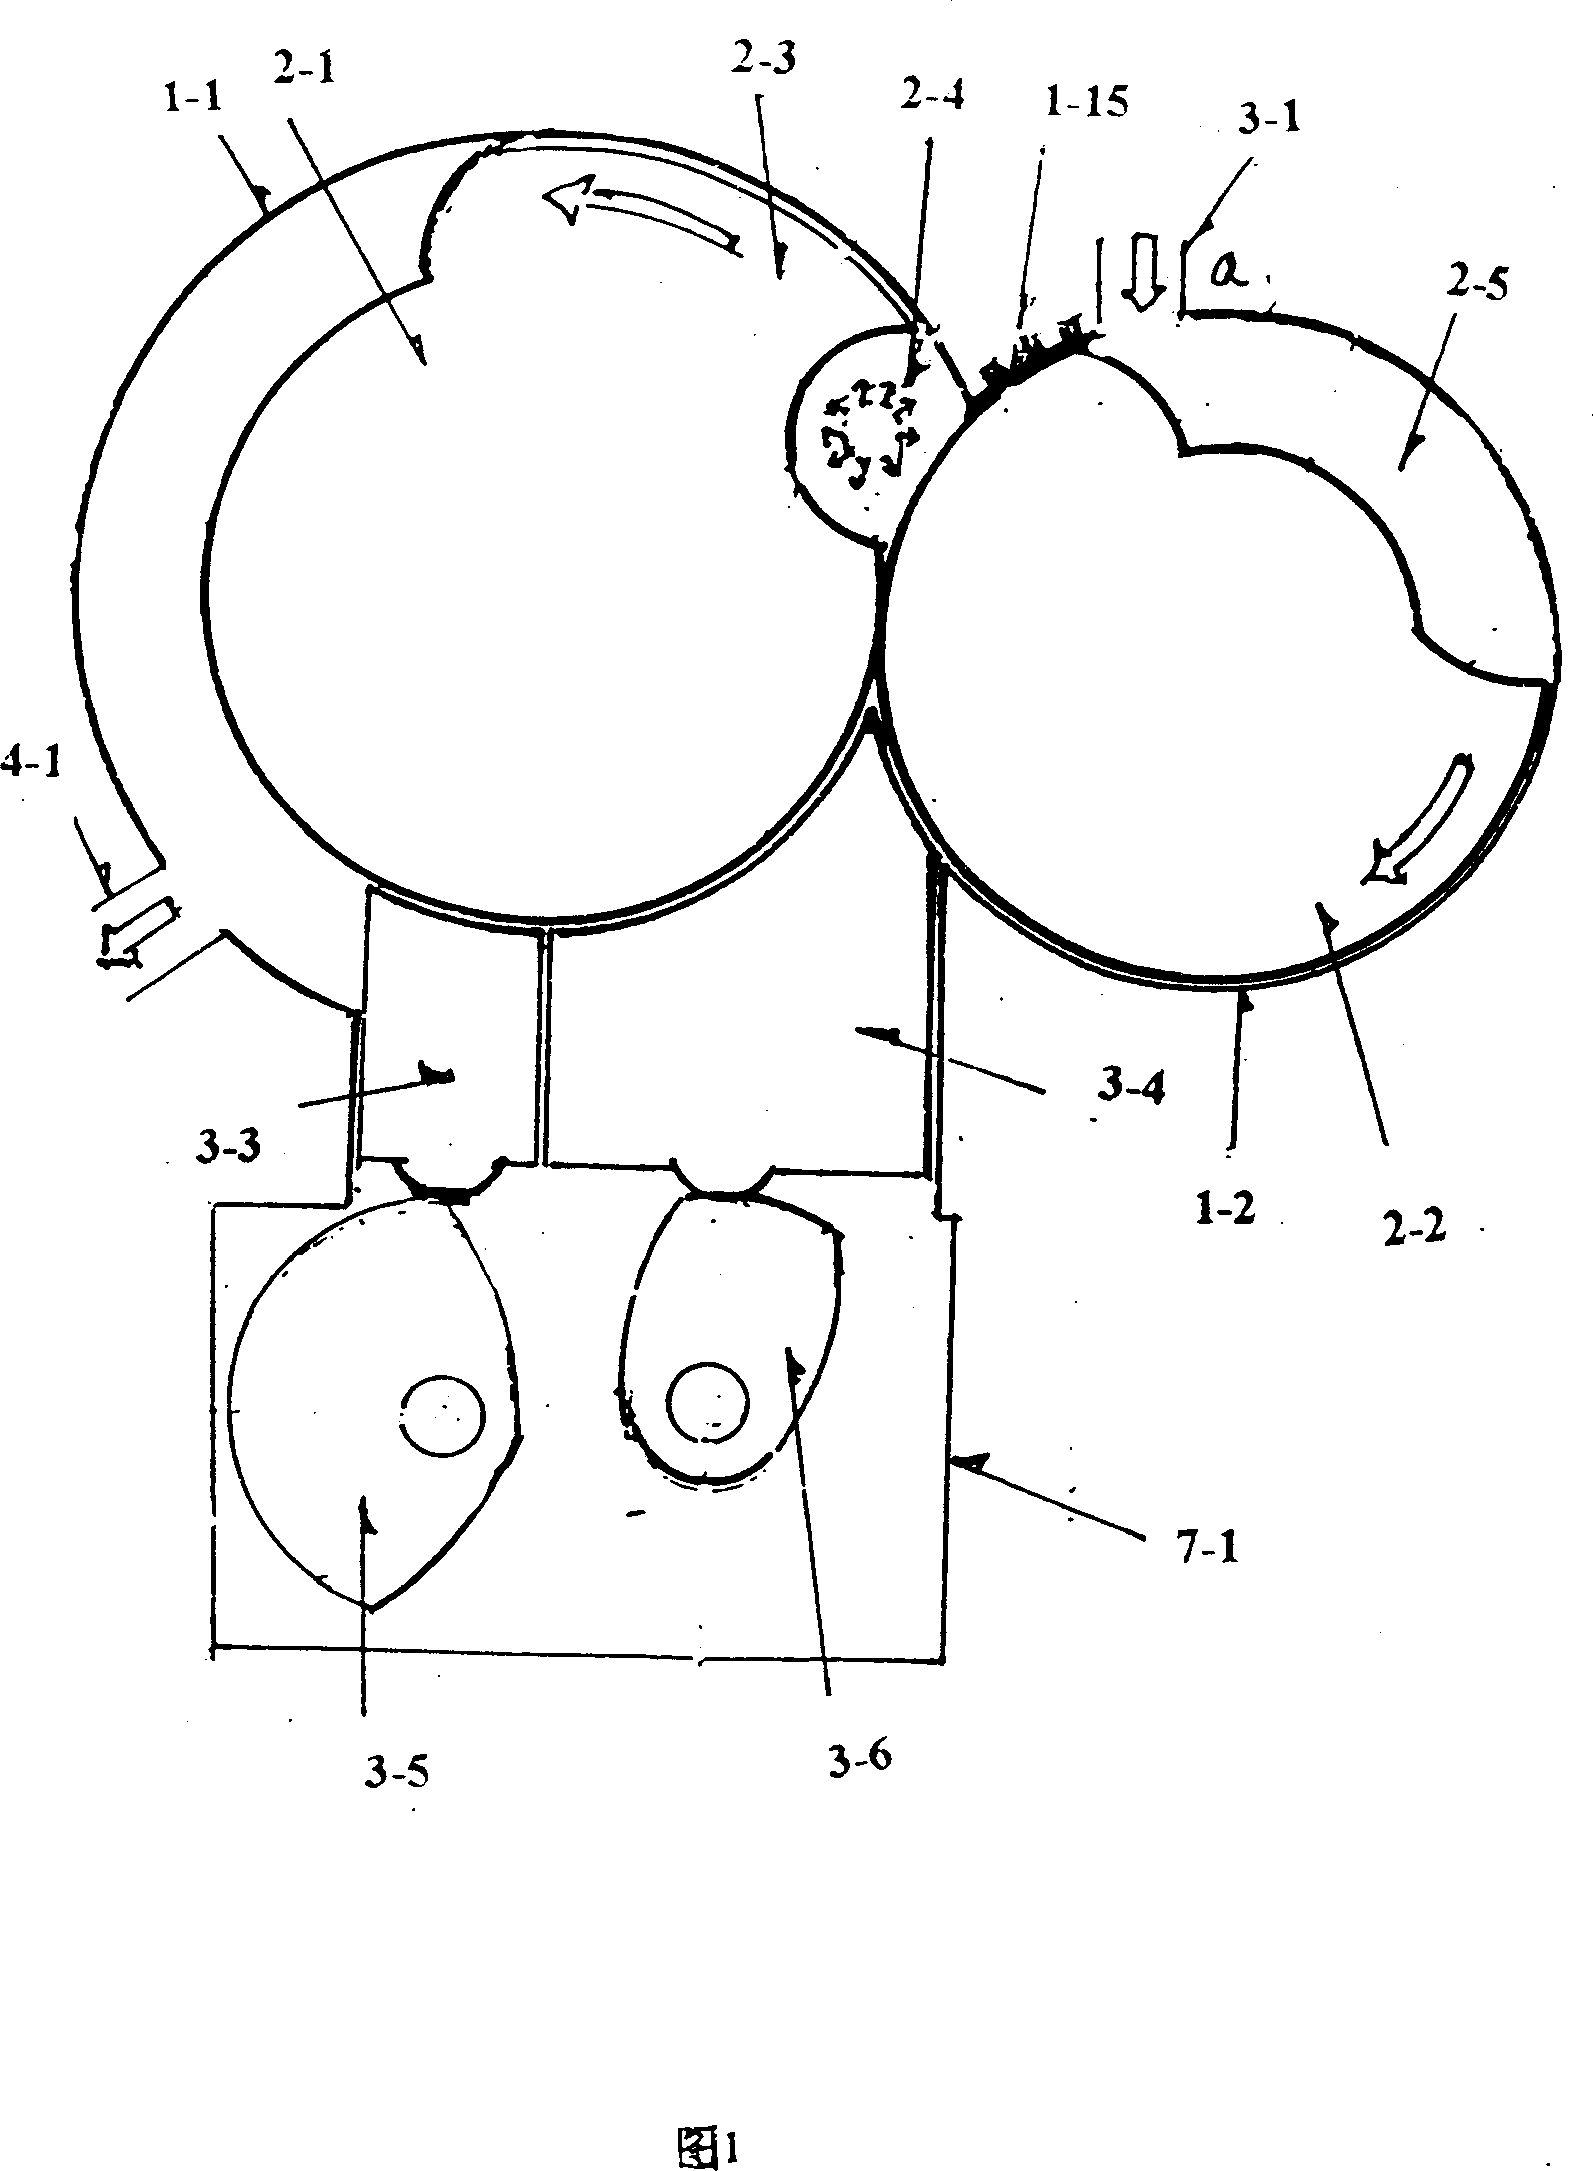 Double wheel normal rotor engine